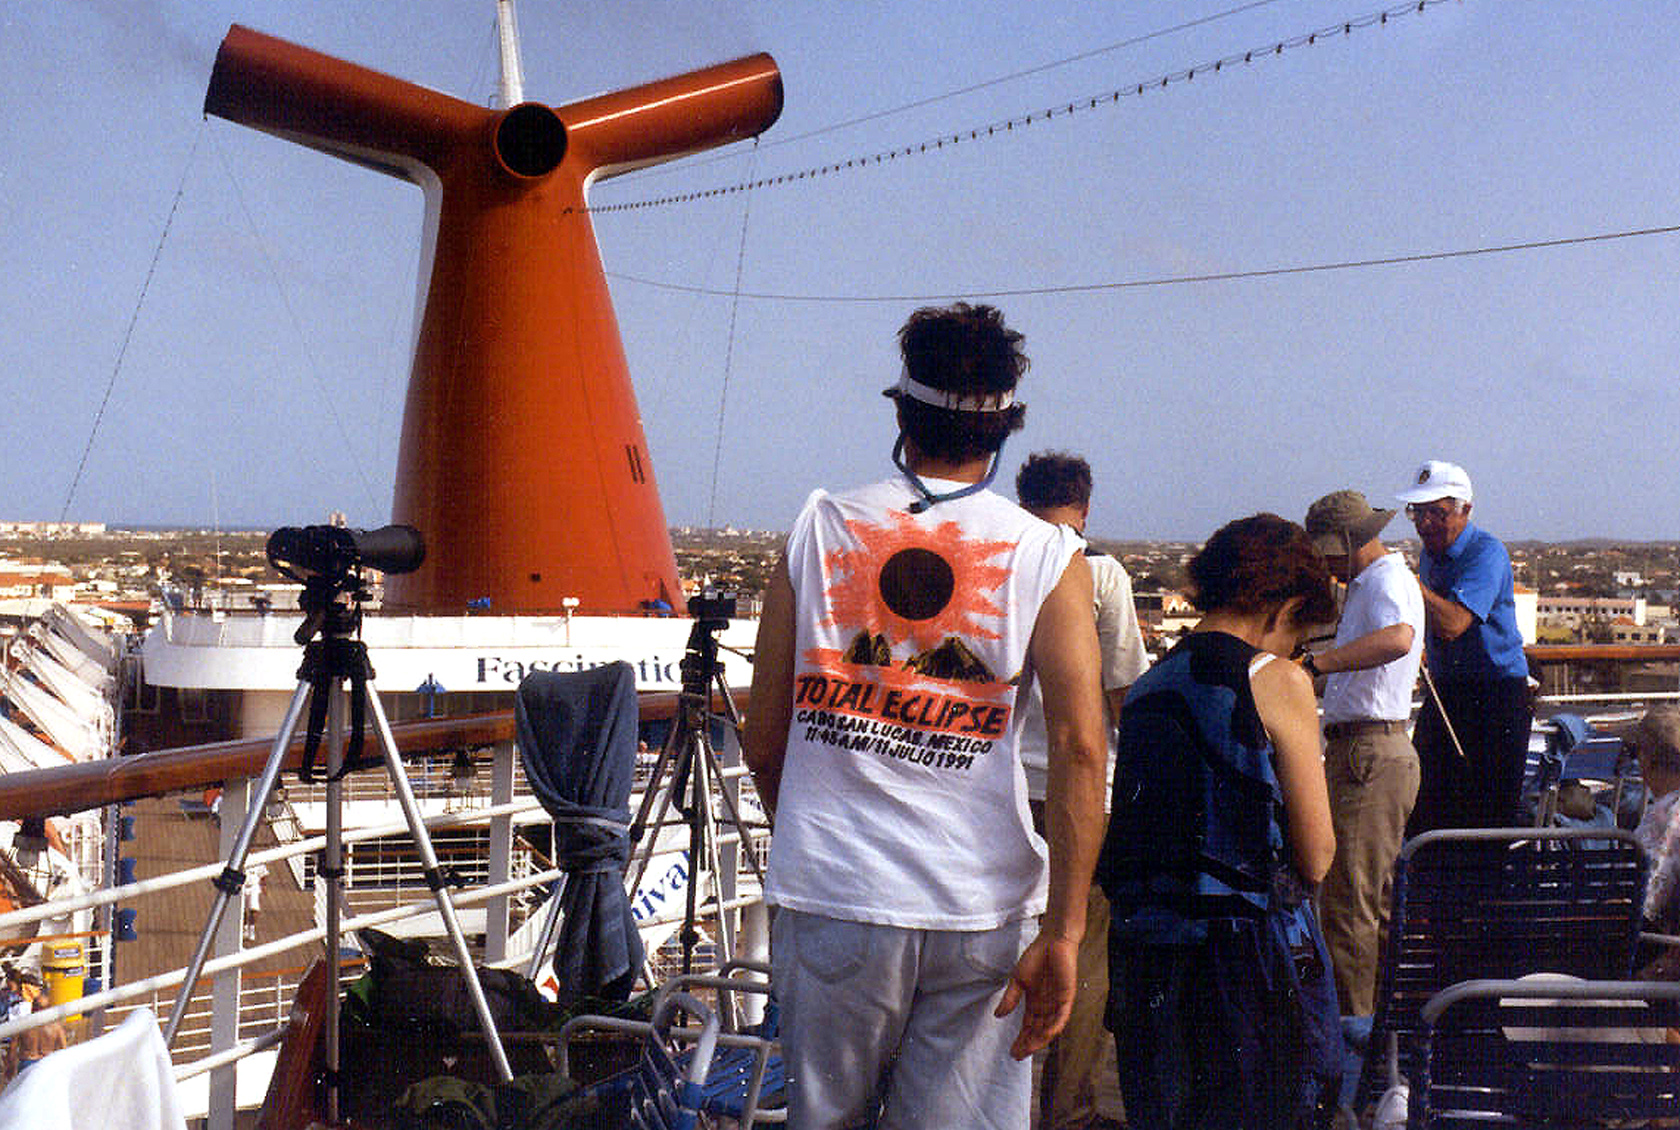 Eclipse 1998 - A50 - Setting up